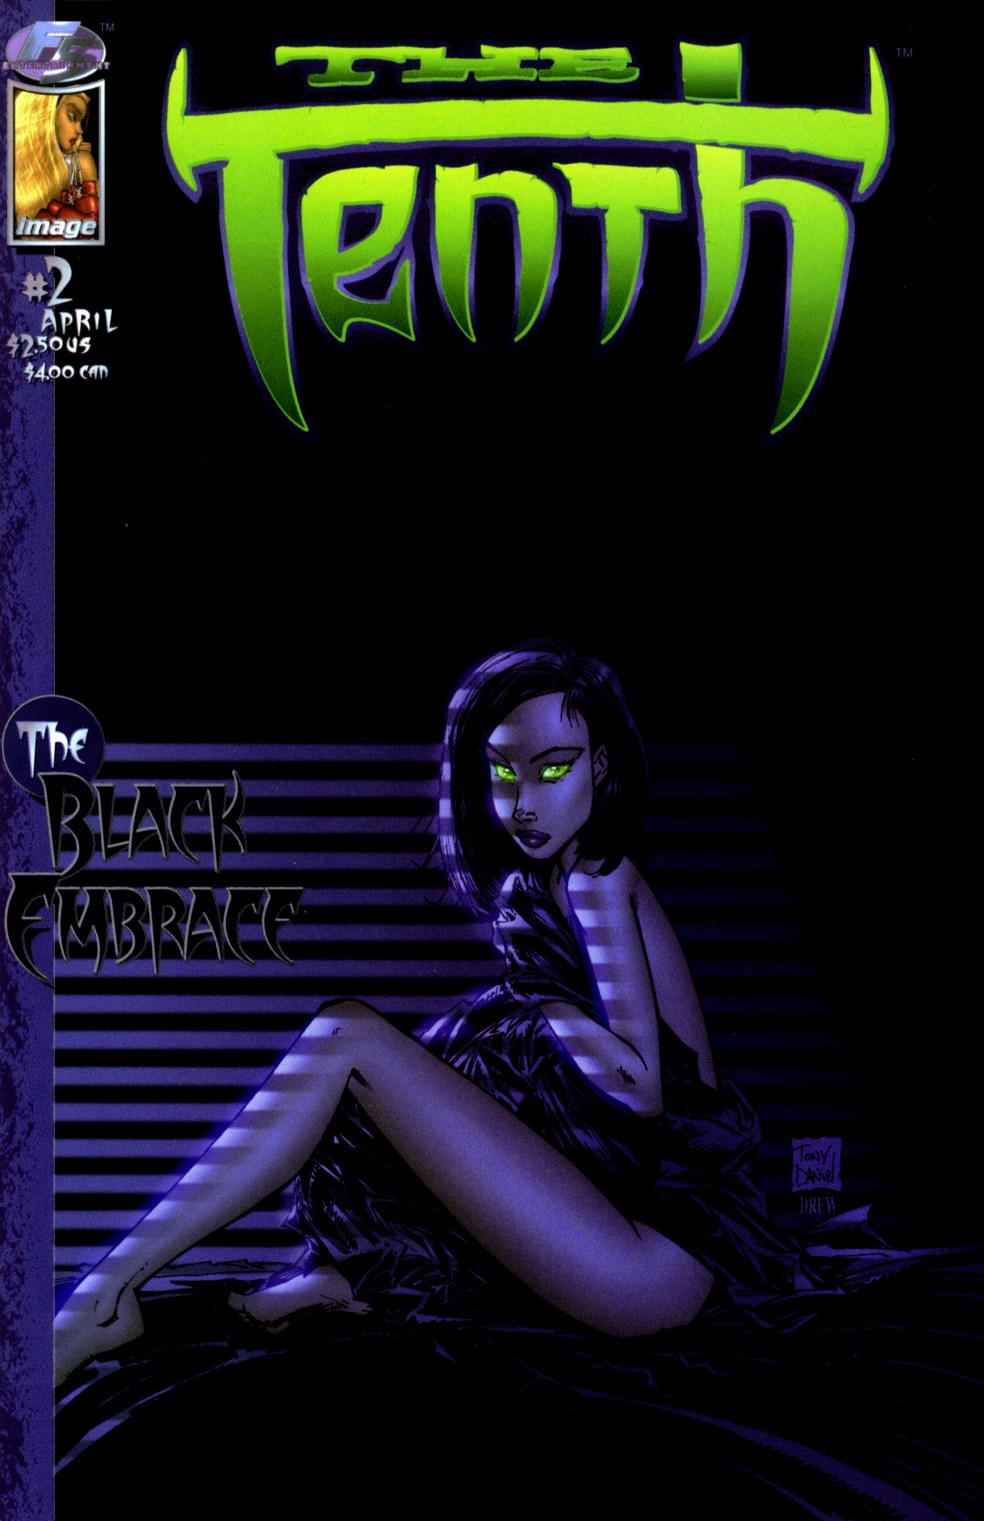 Read online The Tenth: The Black Embrace comic -  Issue #2 - 1